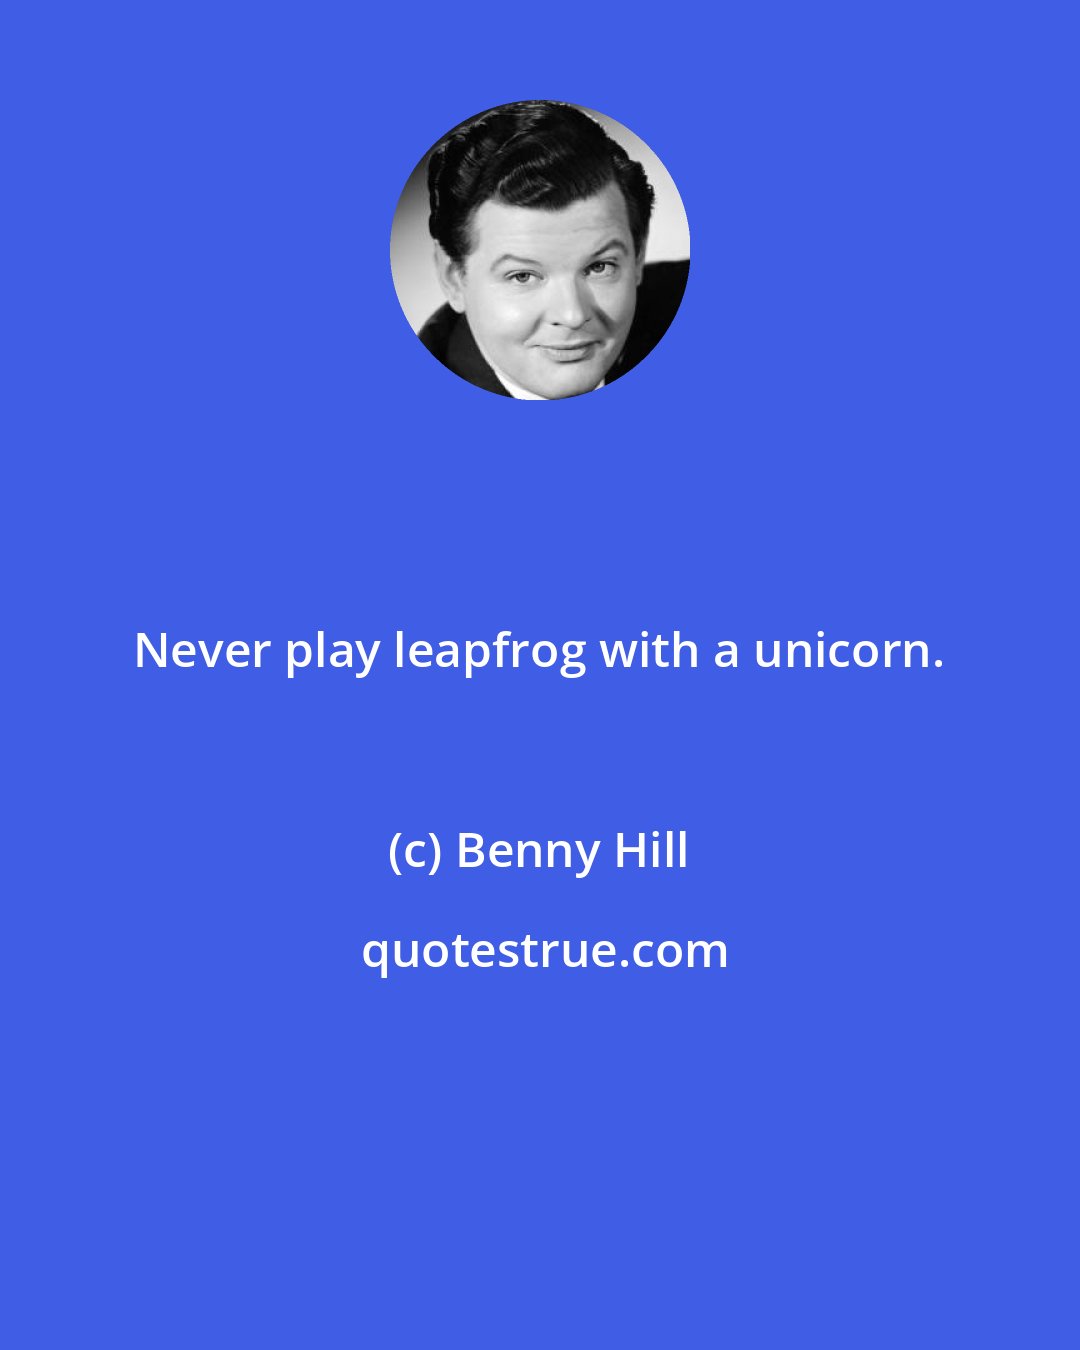 Benny Hill: Never play leapfrog with a unicorn.